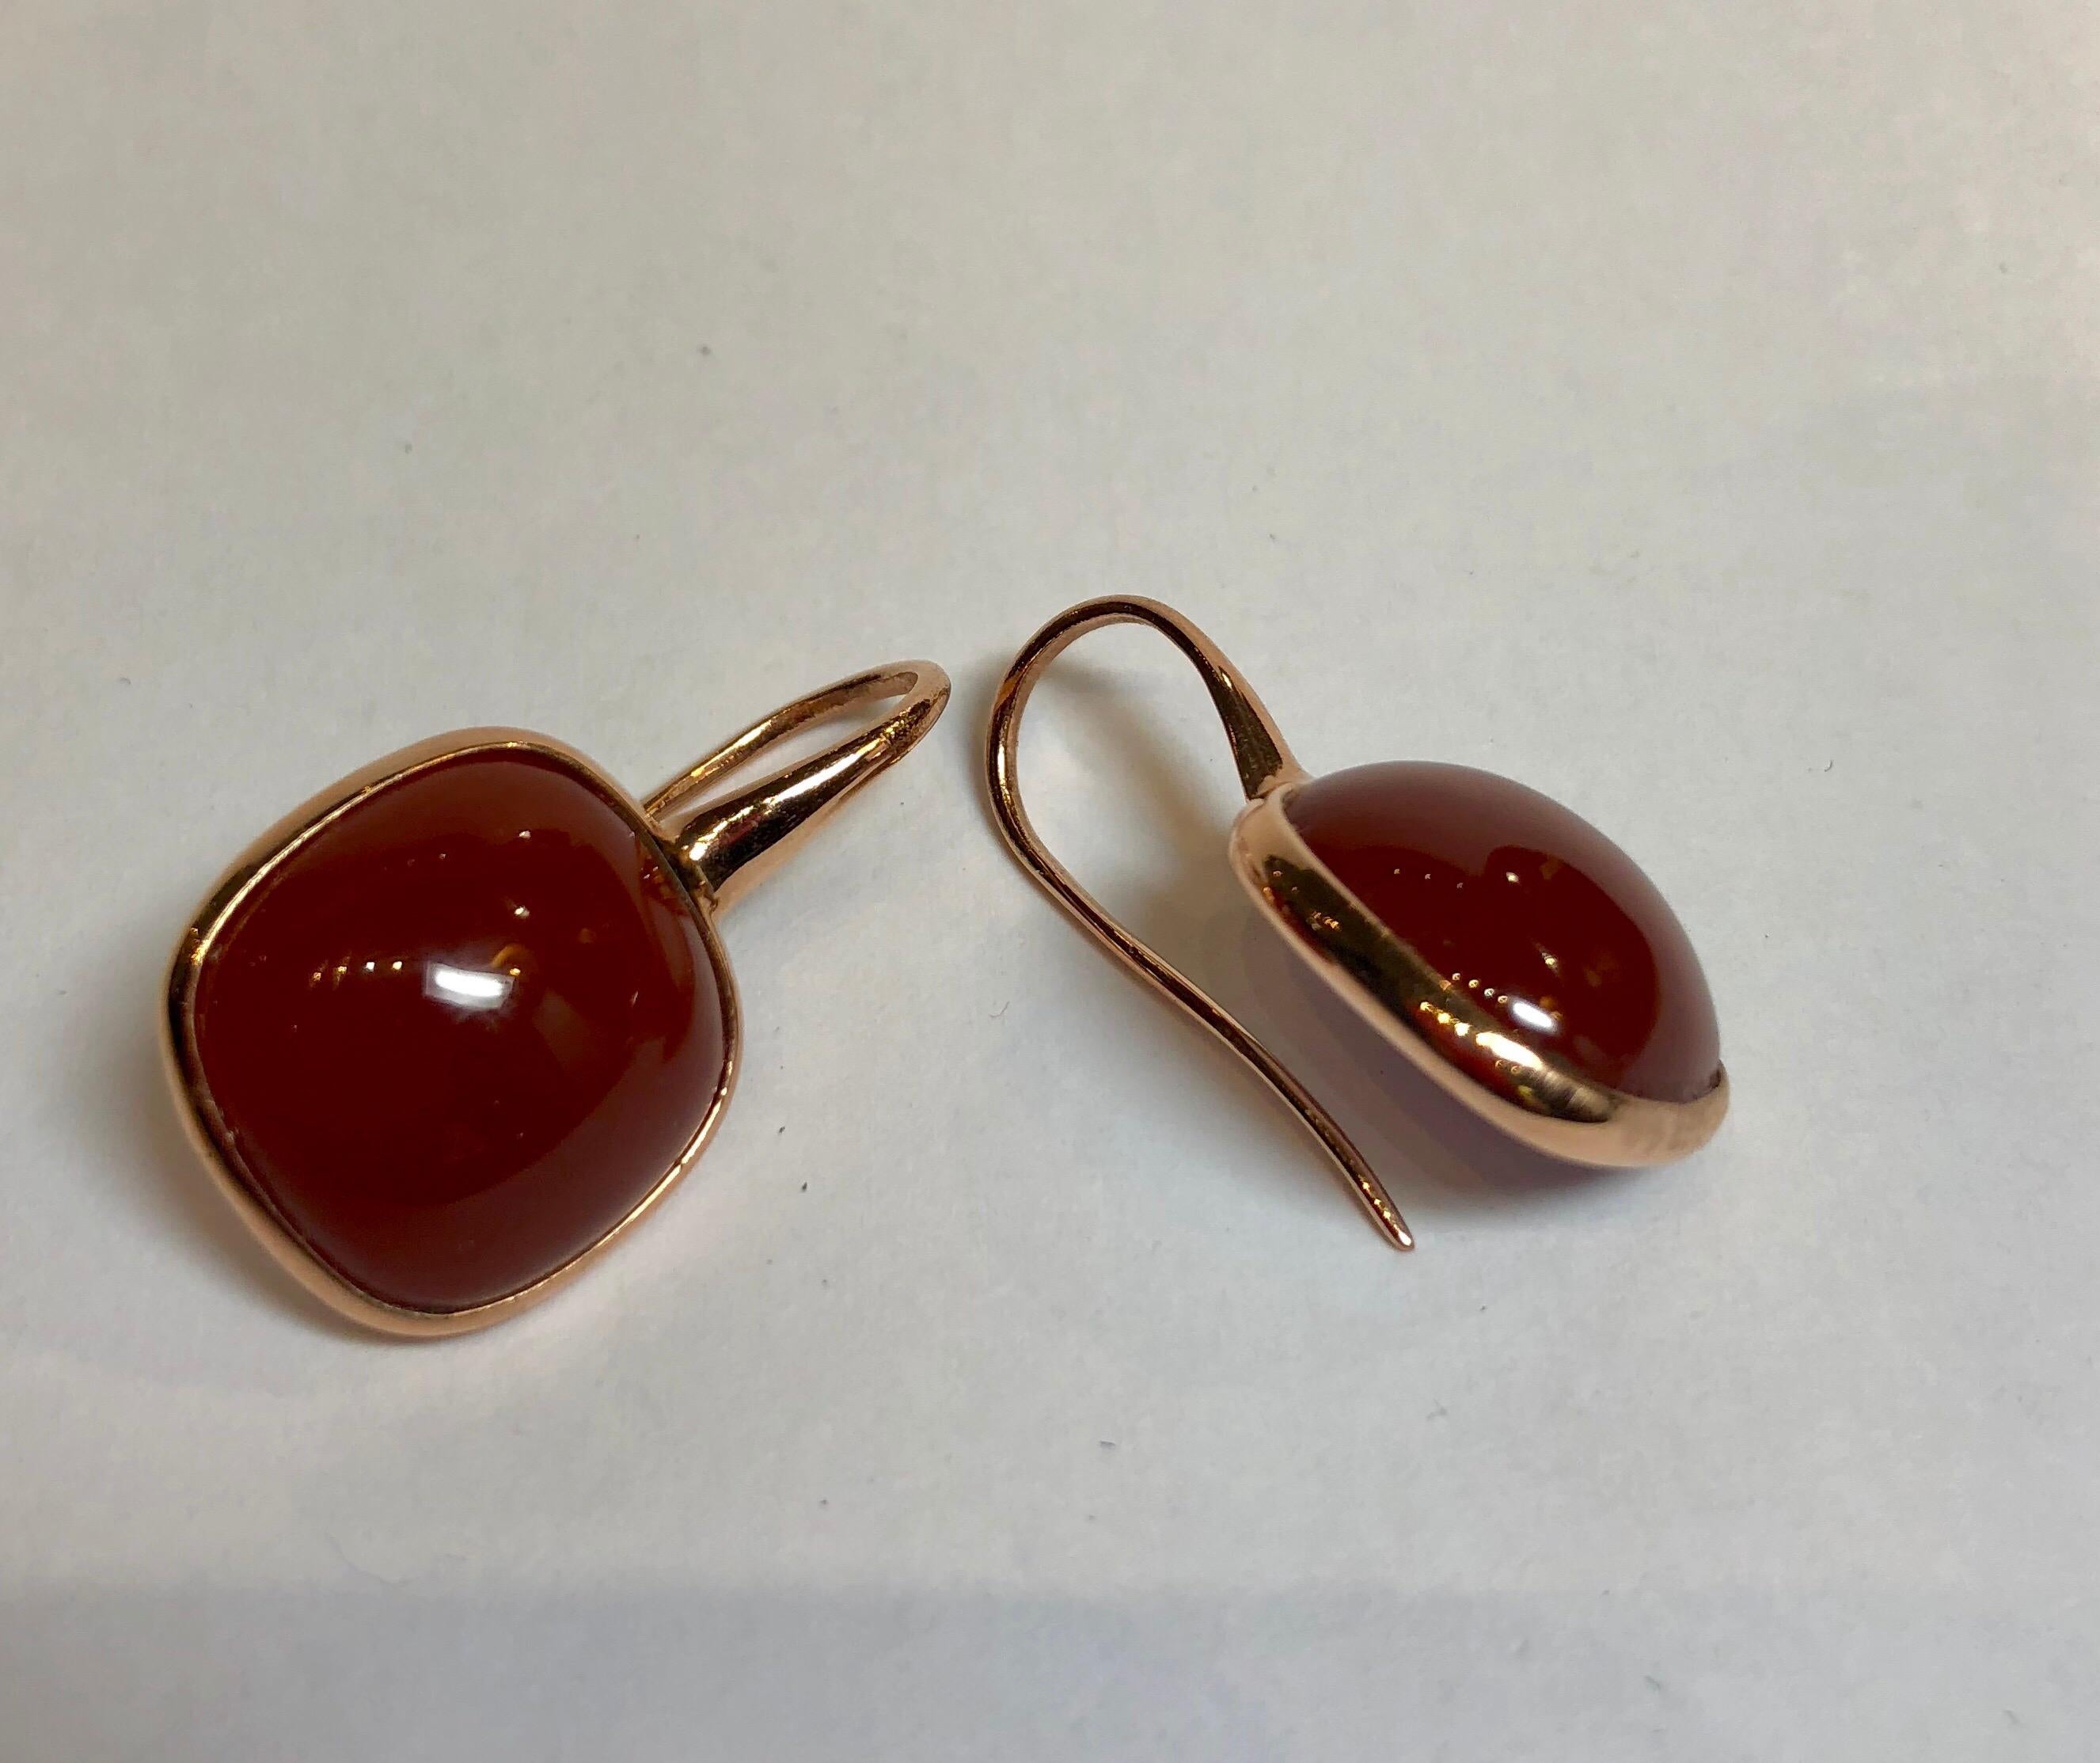 Red agathe earrings on pink gold.
A thin plate of mother of pearl mounted under the red agathe allows ti give an intensity to the color .
the rose gold is very good  with the agathe